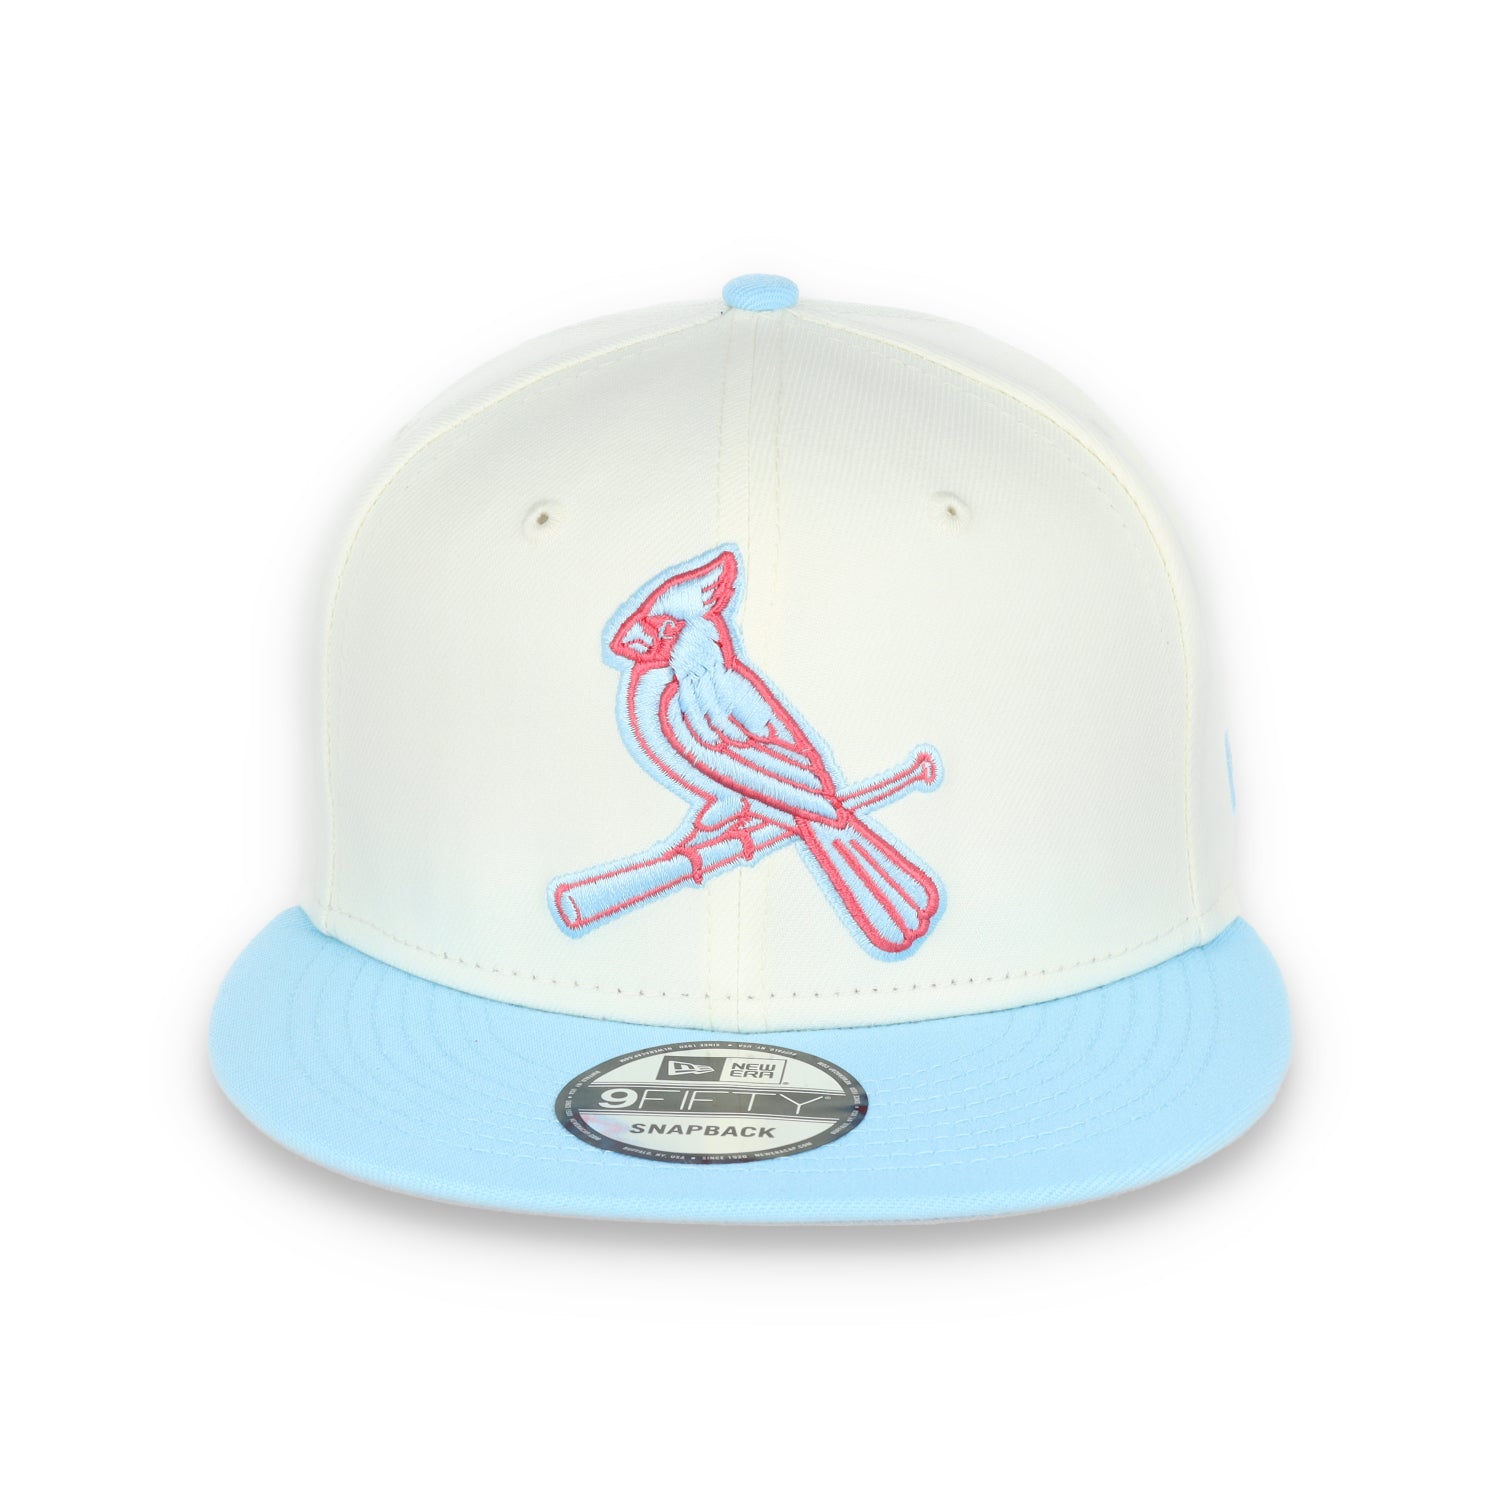 New Era St. Louis Cardinals 2-Tone Color Pack 9FIFTY Snapback Hat- Chrome/Baby Blue